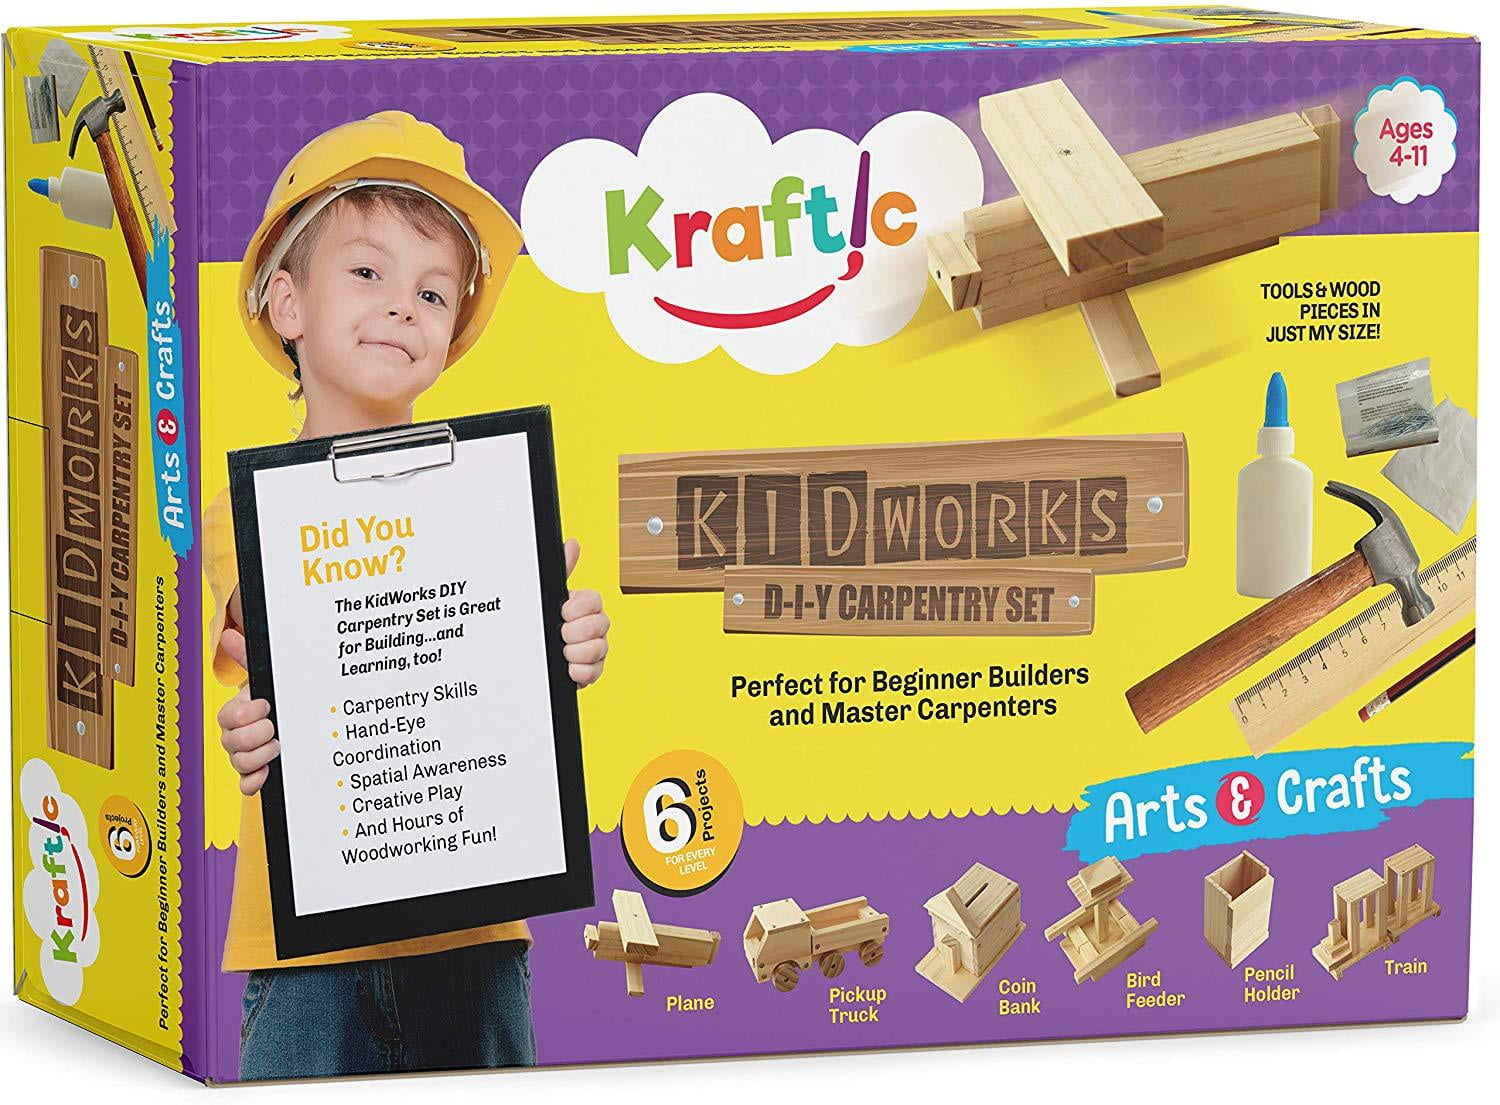 Buy Kraftic Woodworking Building Kit for Kids and Adults, Set of 3  Educational DIY Carpentry Construction Wood Model Kit Toy Projects for Boys  and Girls - Off-Road Vehicle, Flatbed Truck, Barn Birdhouse